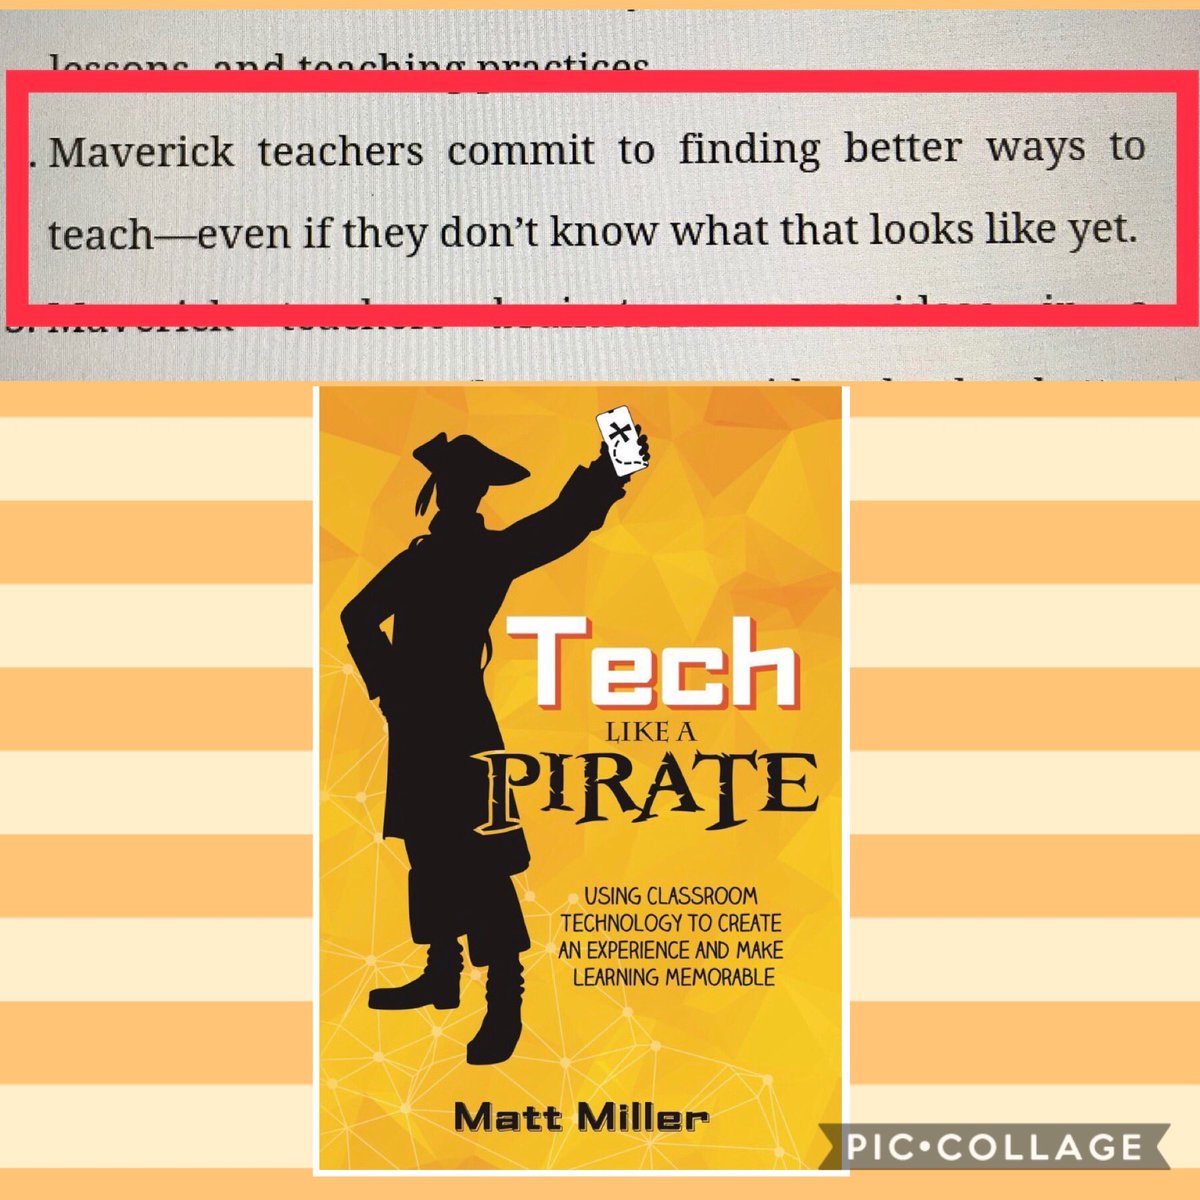 This quote by @jmattmiller perfectly describes my mindset! #TechLAP is a treasure trove of ideas & inspo!🏴‍☠️ @CharnickSCES-another book #TBR  @dbc_inc #DitchBook #tlap @DitchThatTxtbk